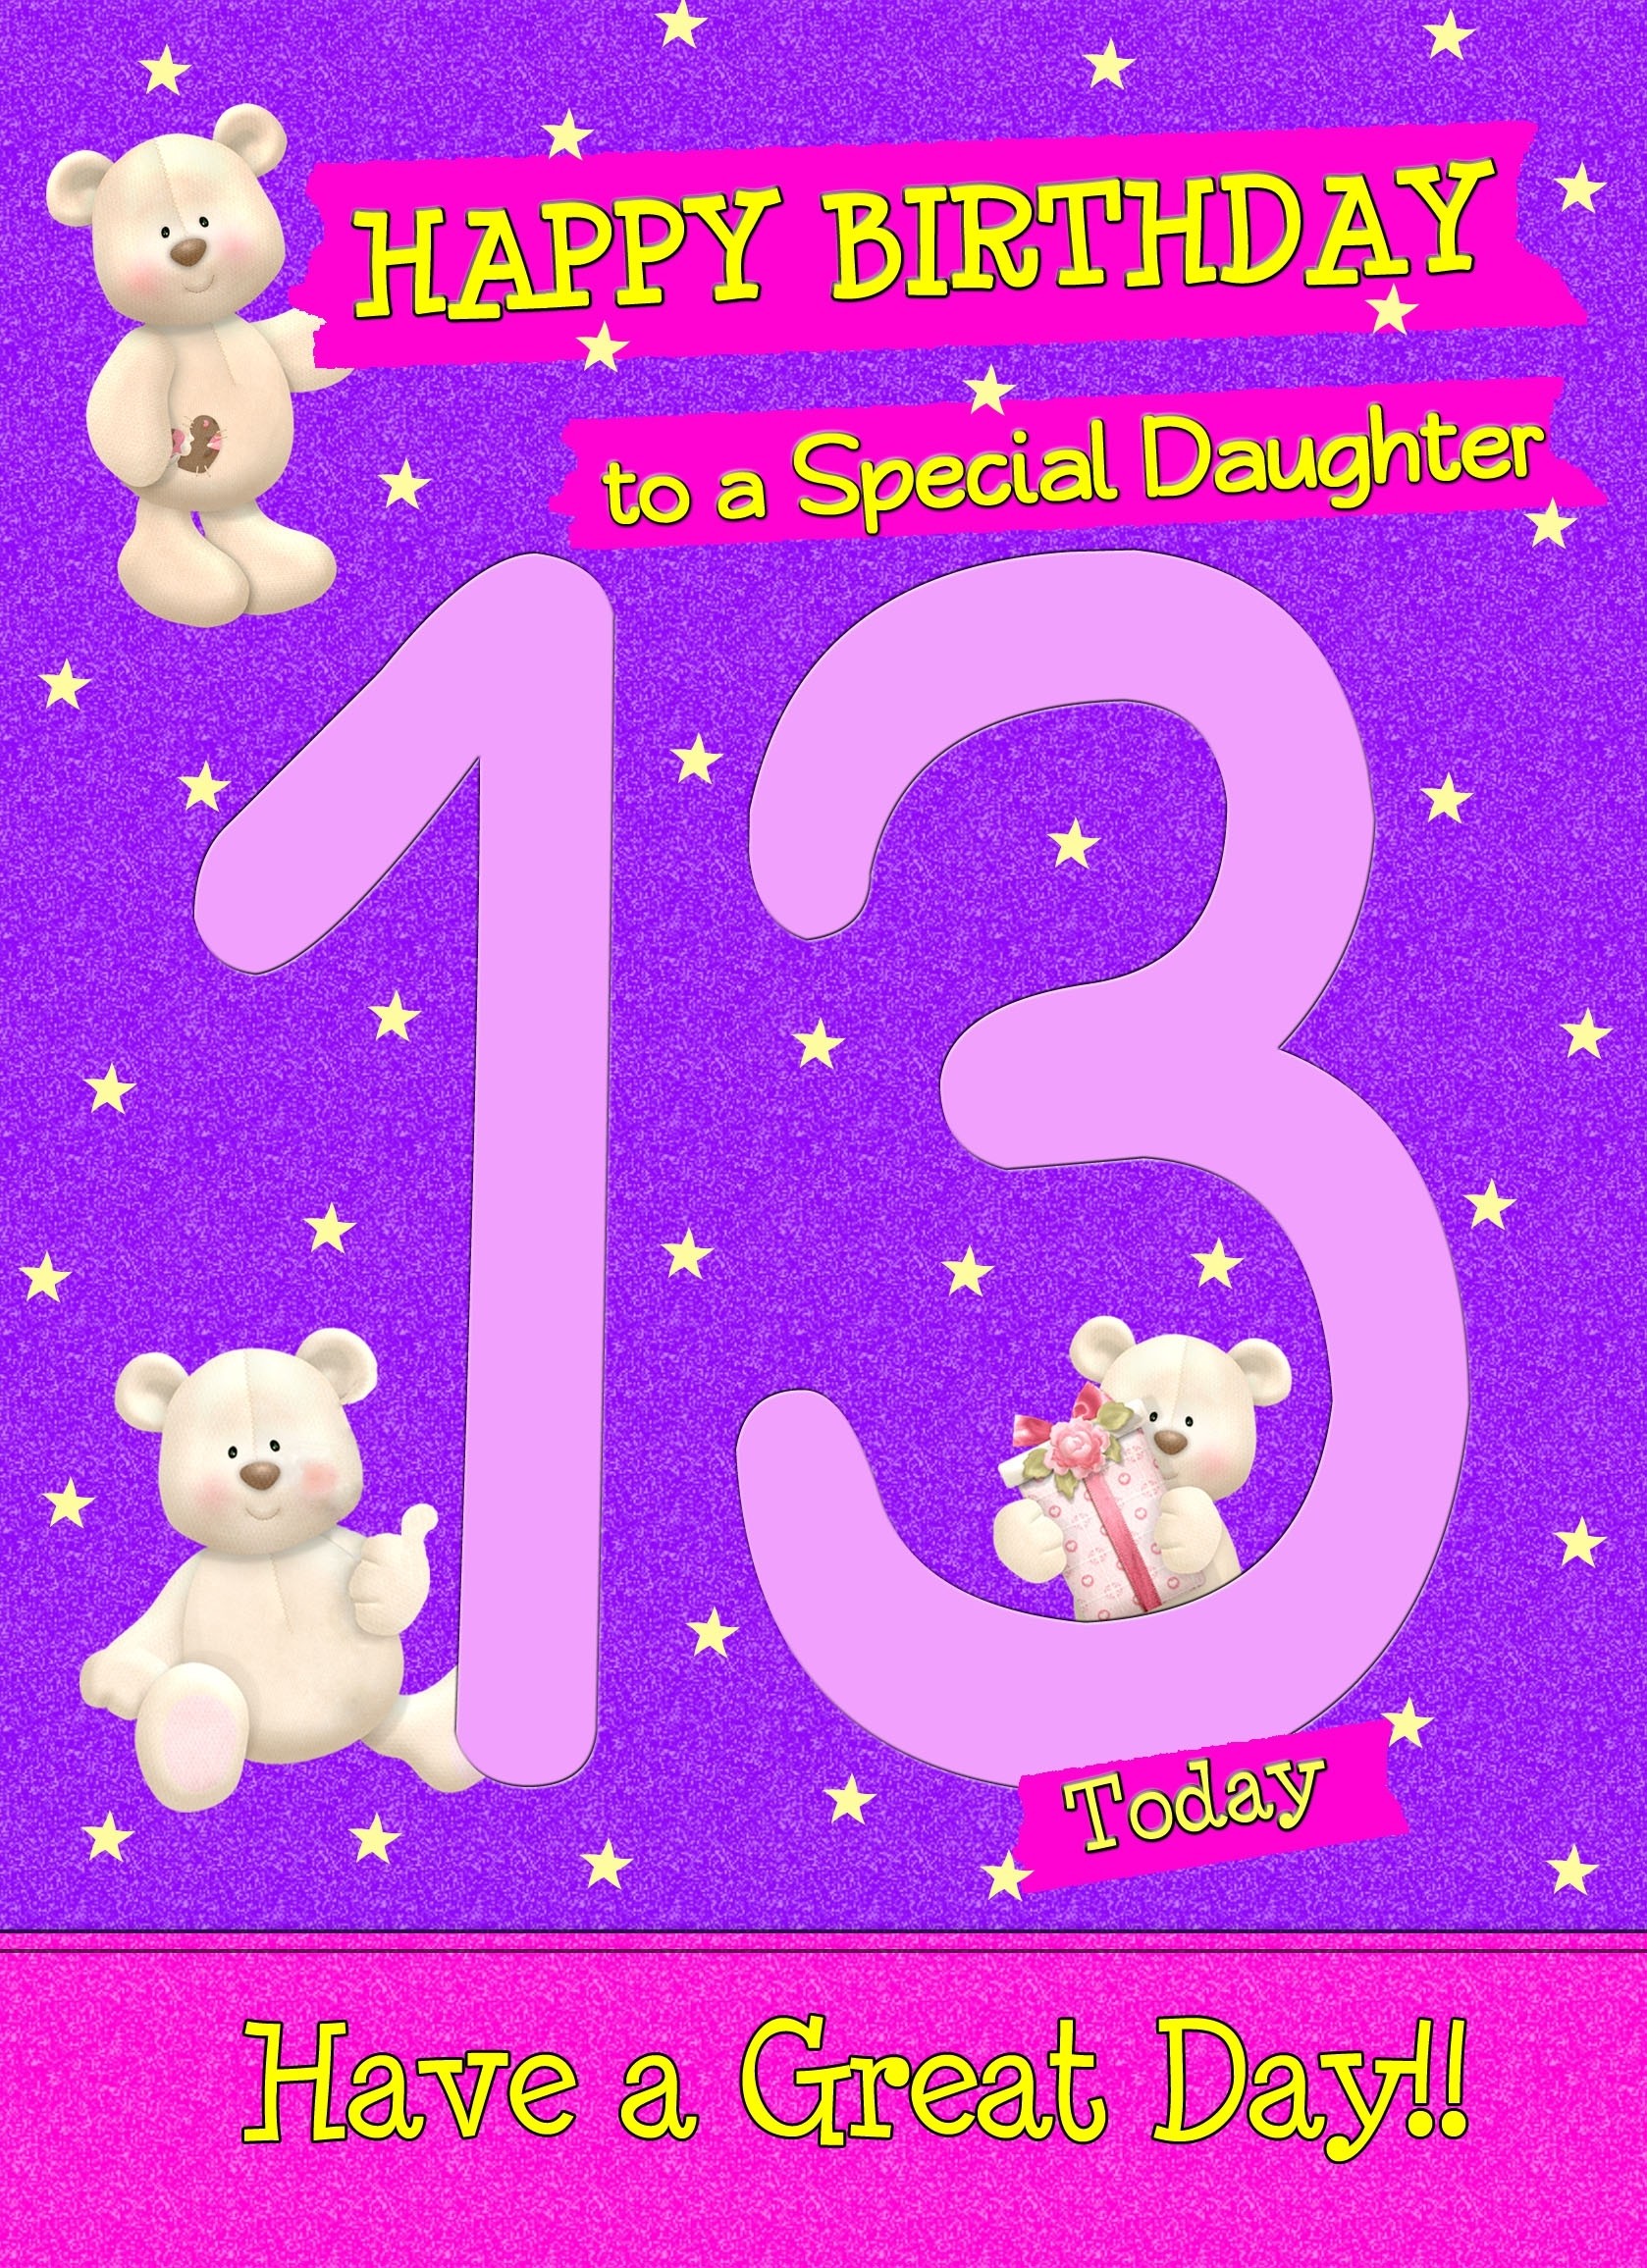 13 Today Birthday Card (Daughter)